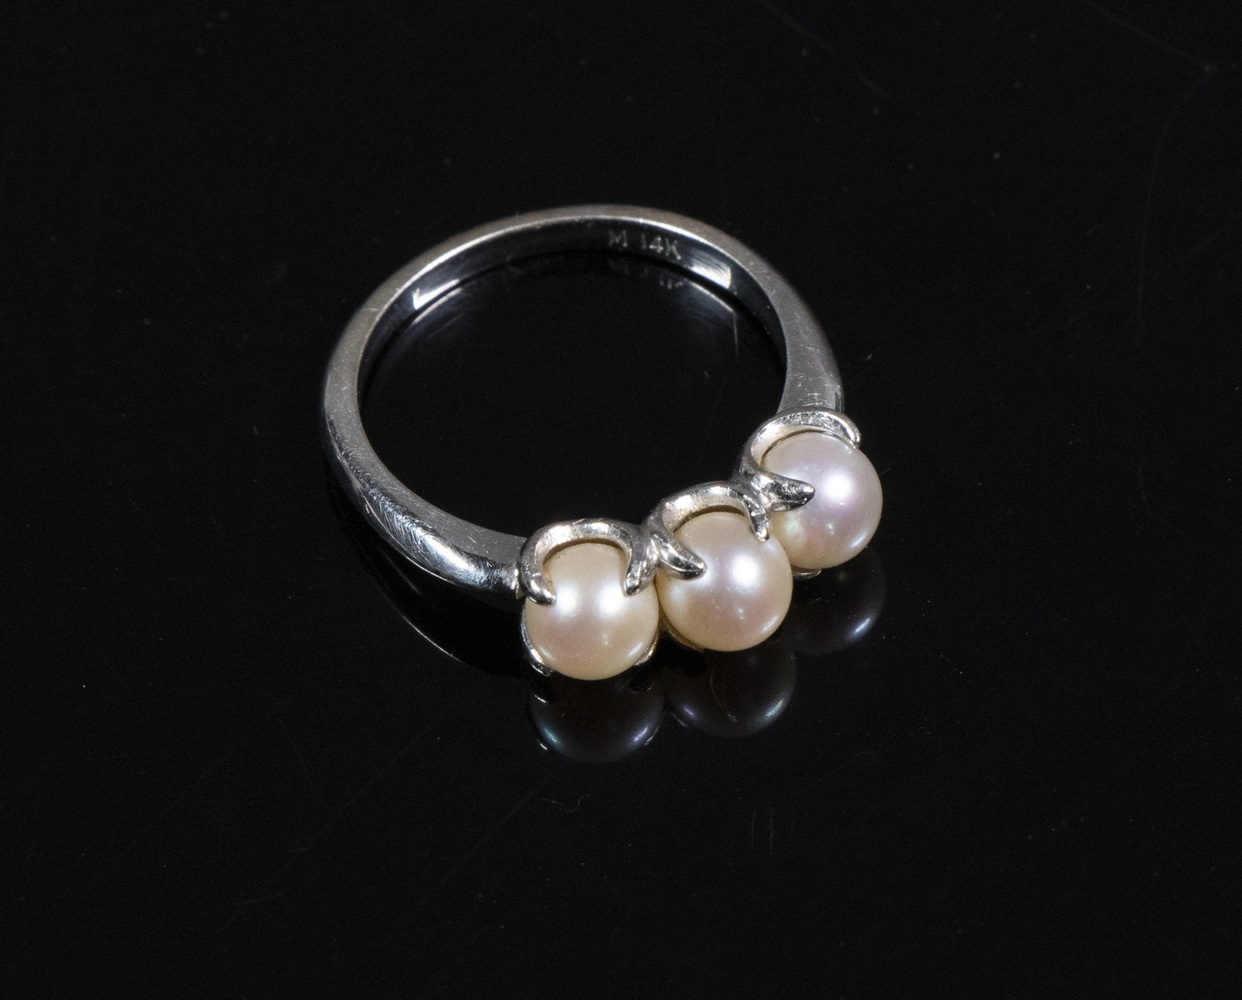 LADY'S PEARL RING 14K White Gold